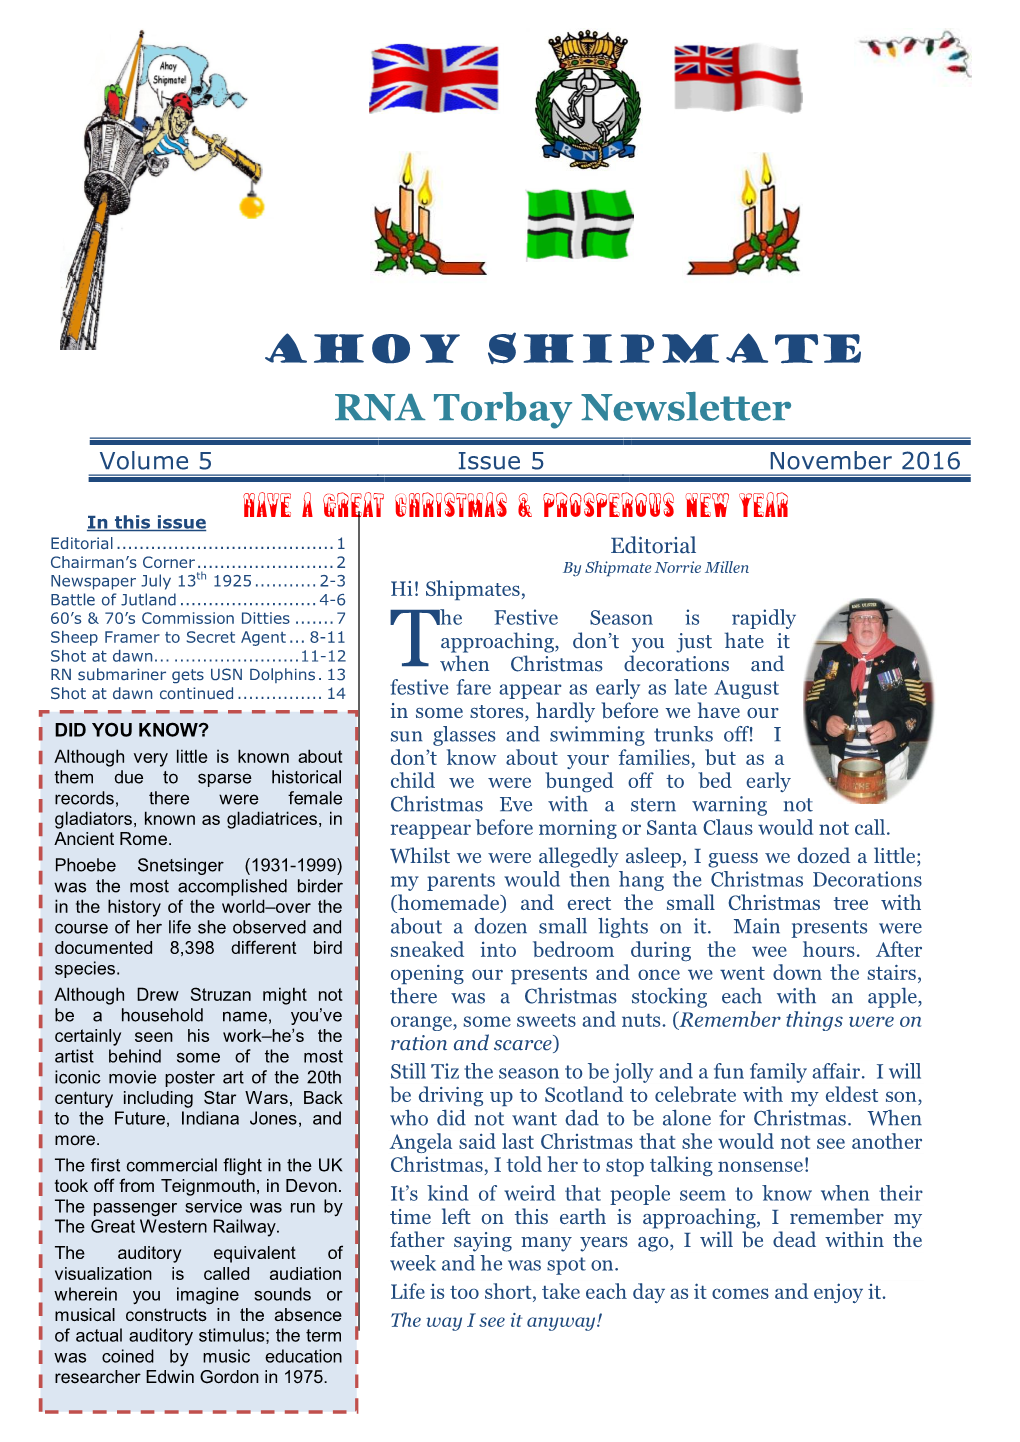 Ahoy Shipmate RNA Torbay Newsletter Volume 5 Issue 5 November 2016 Have a Great Christmas & Prosperous New Year in This Issue Editorial